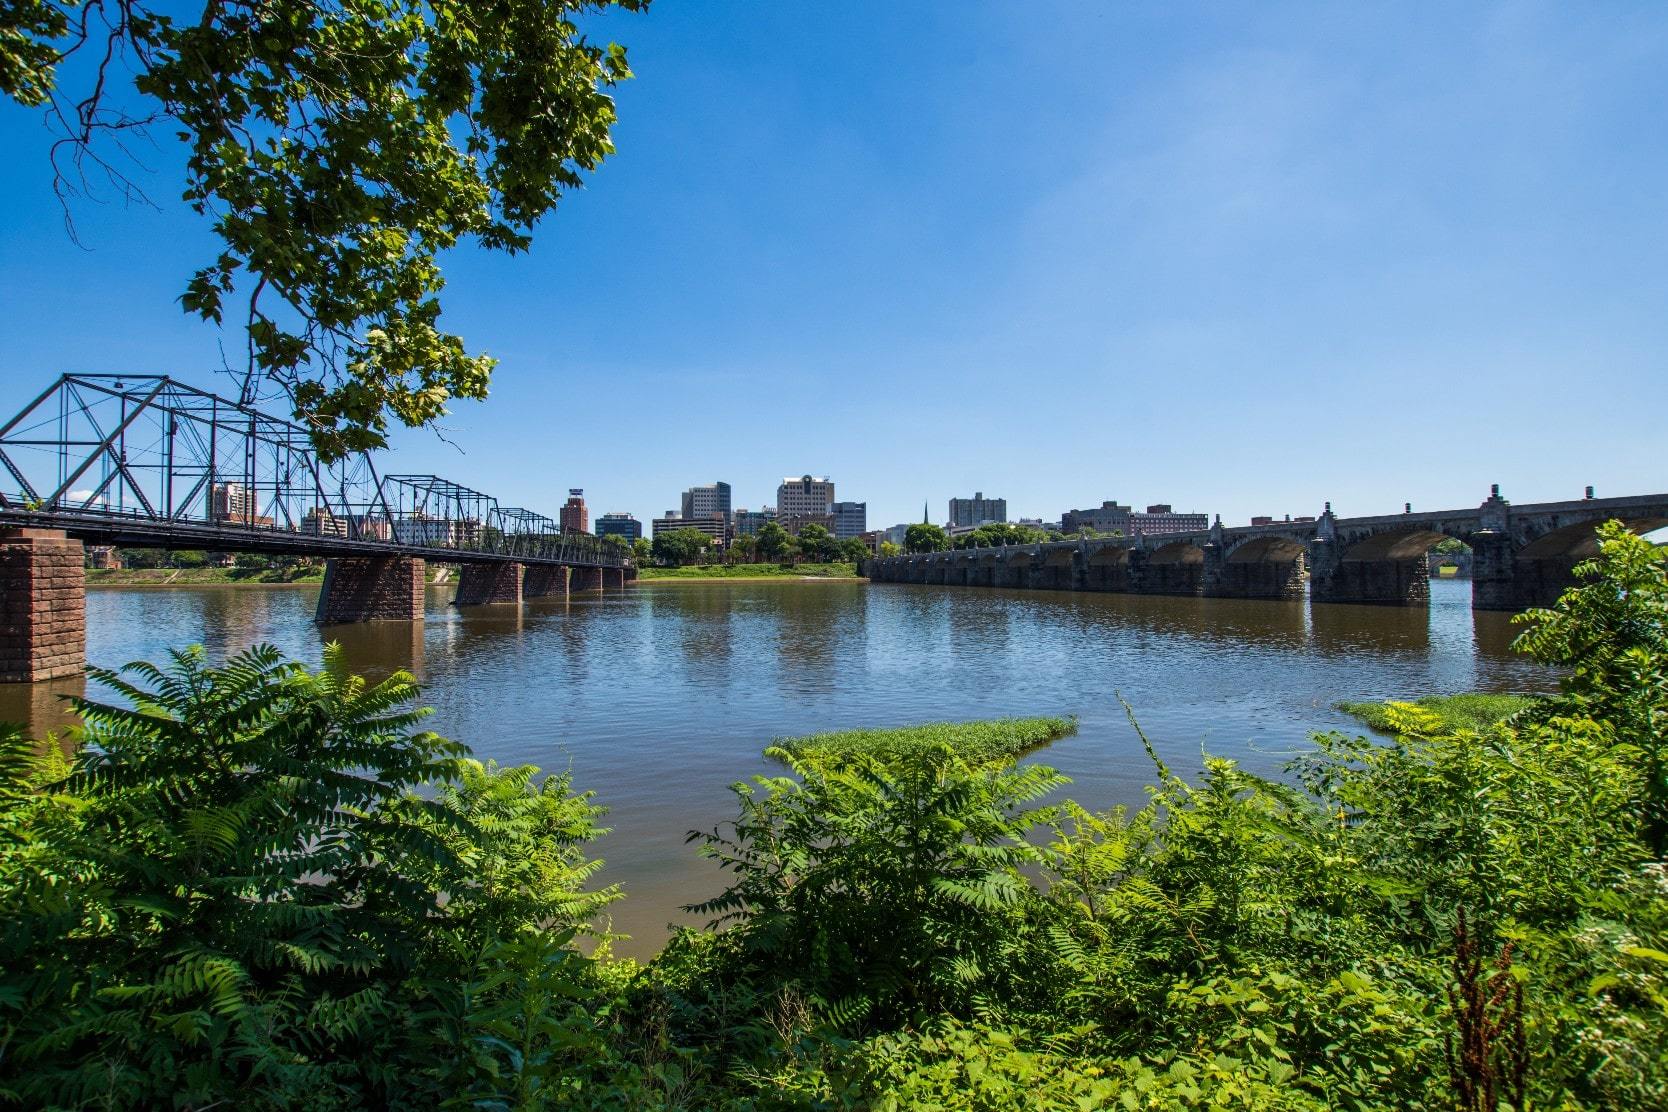 View of the Susquehanna River and Harrisburg skyline with waterfront real estate in Dauphin County, PA